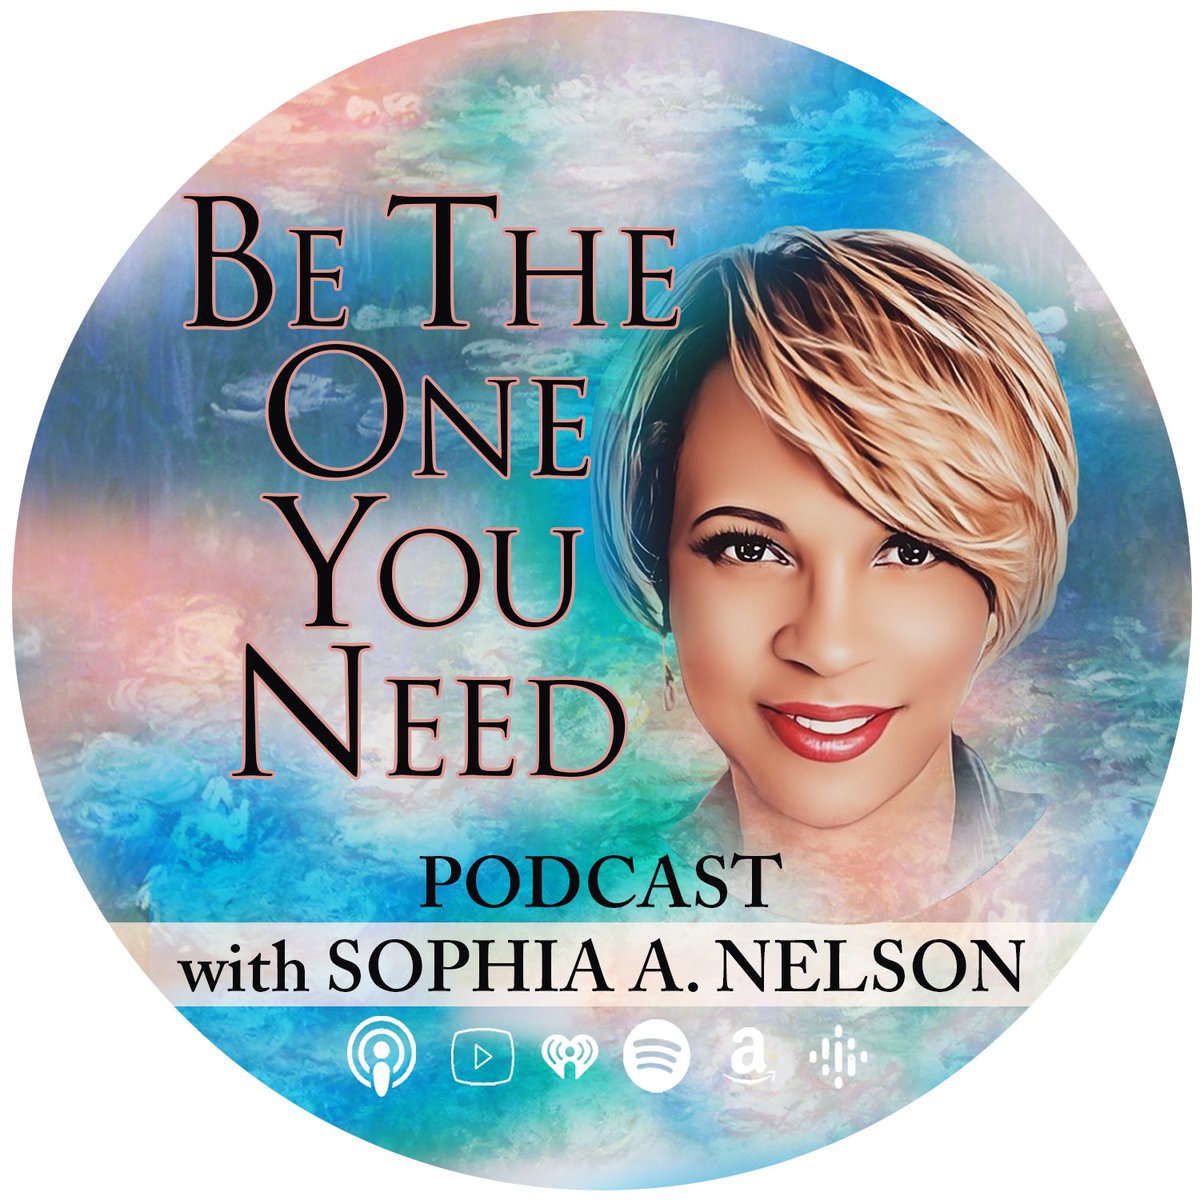 Happy #SelfCareSaturday everyone. We will resume our top 10 rated inspirational wellness podcast with host @iamsophianelson in May. Have a great day and do something wonderful for YOU! #betheoneyouneed #selfcare #wellness